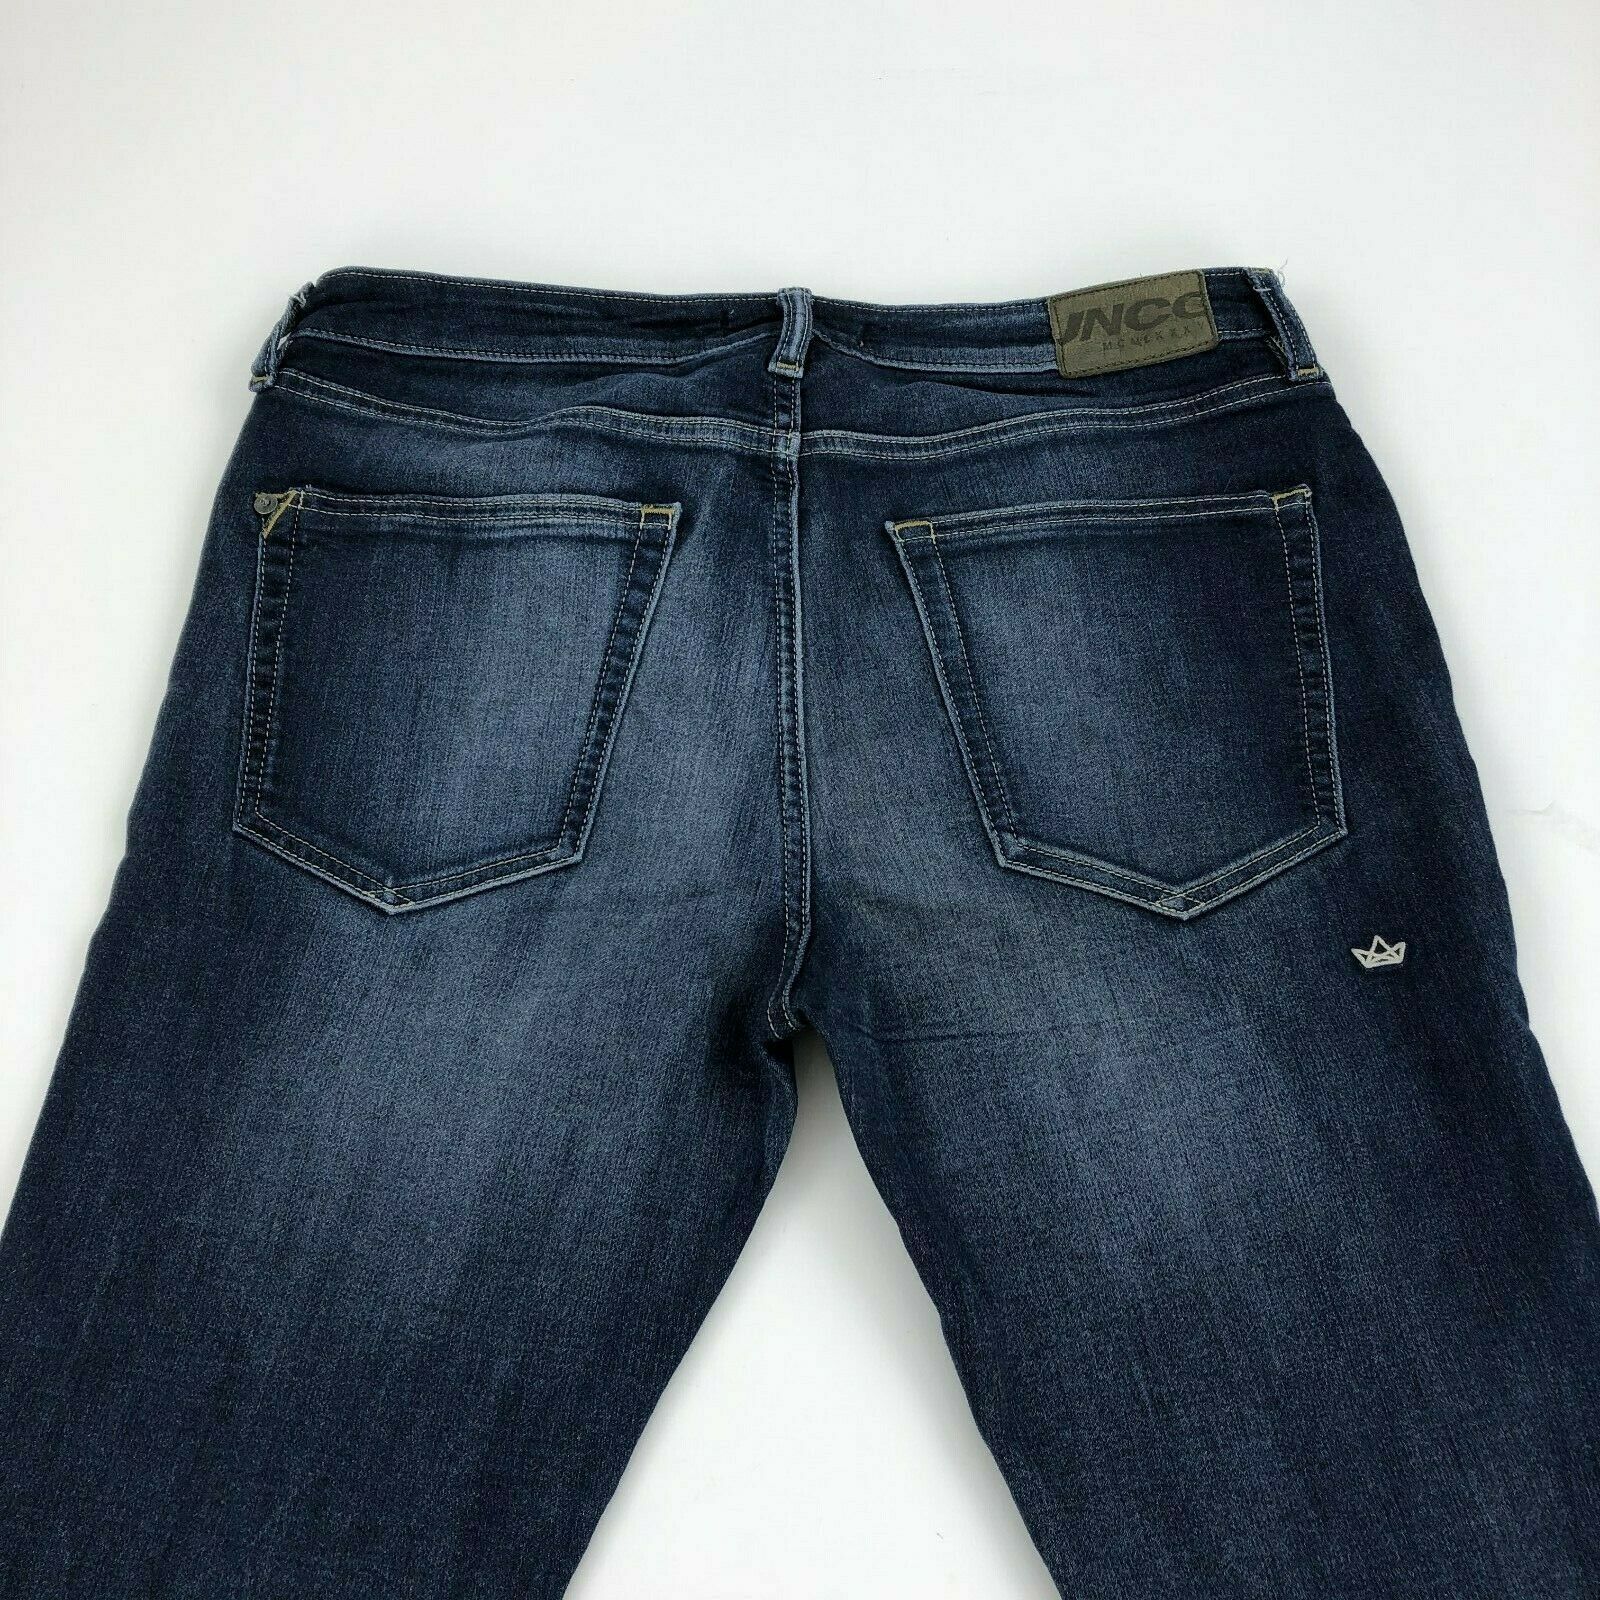 JNCO Skinny Jeans Mens 34 Dark Wash Stretch Crown Embroidered 34X32 A52 ...